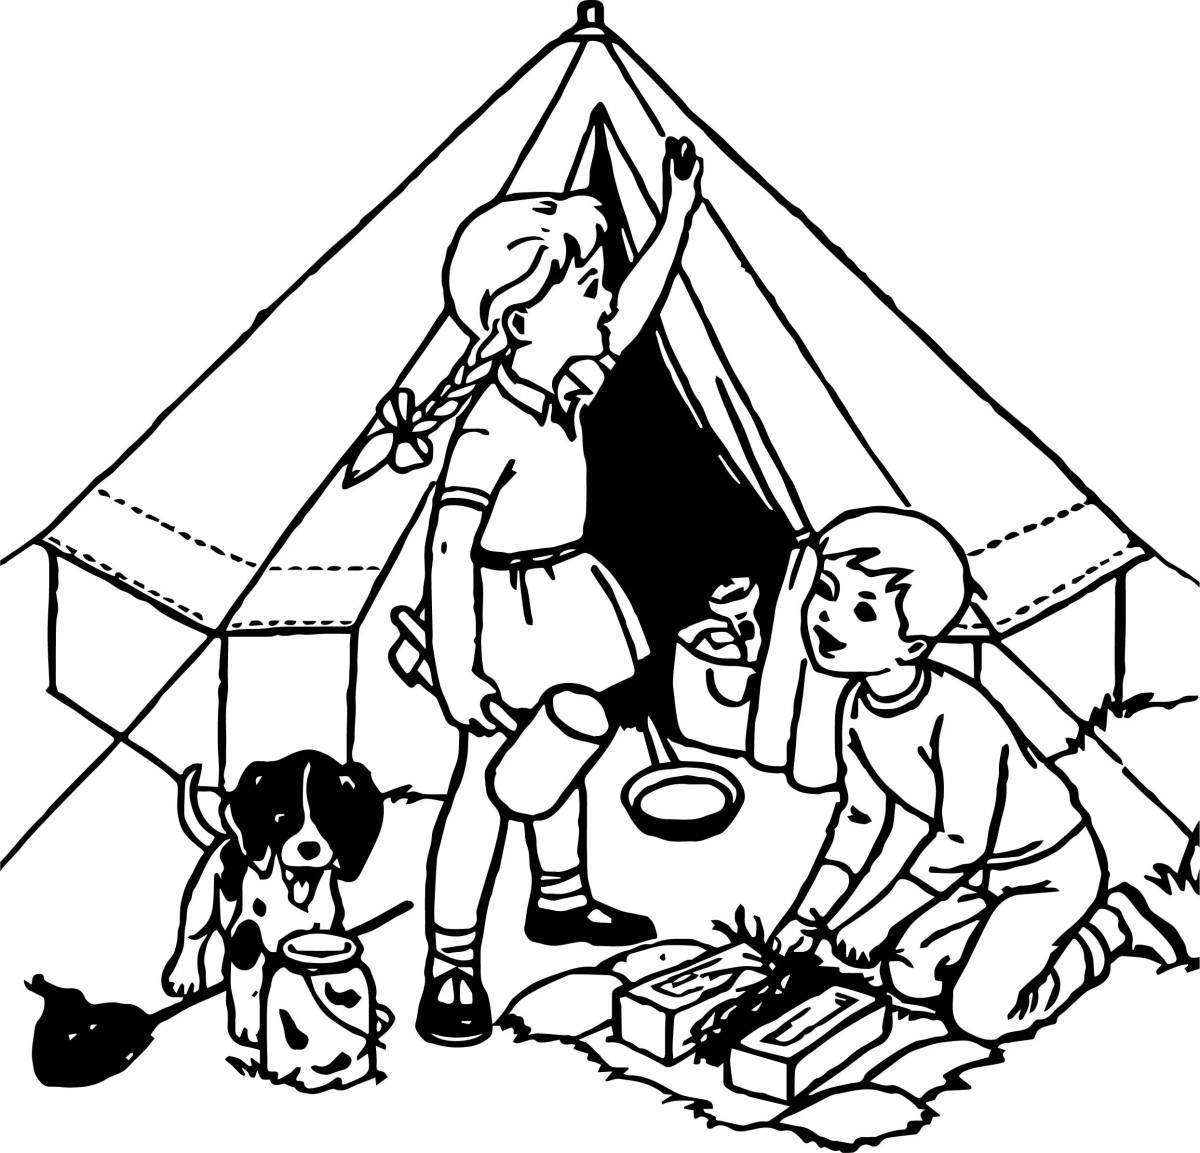 Colored tent coloring book for children